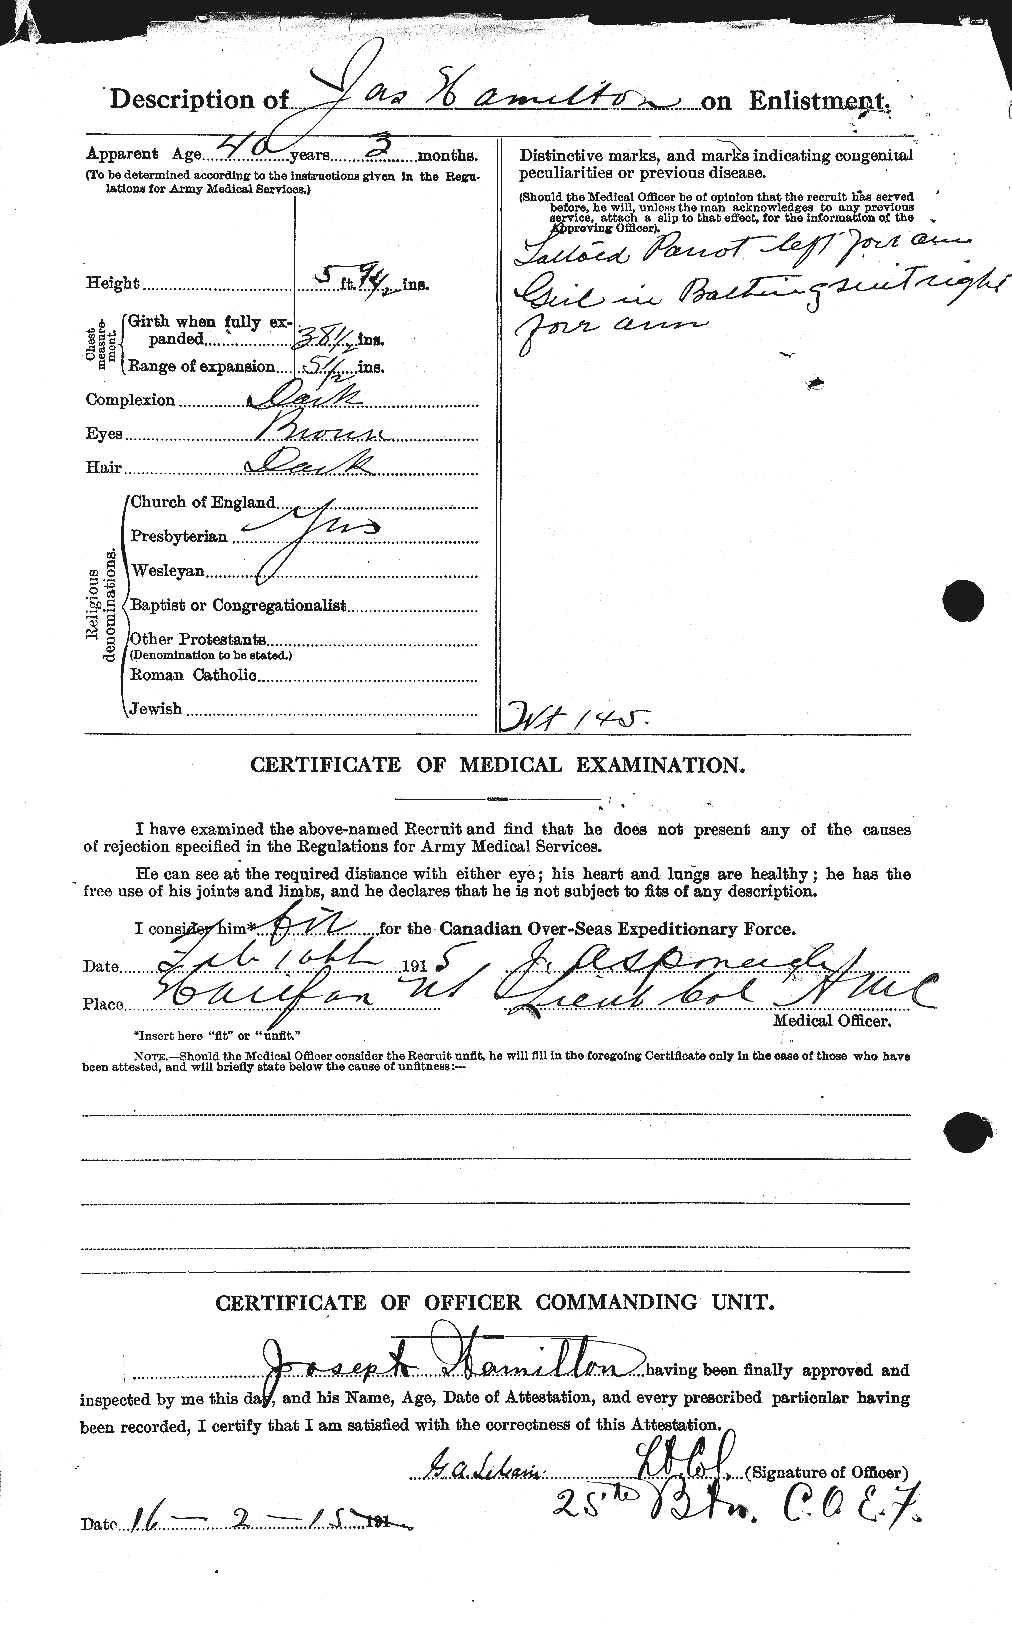 Personnel Records of the First World War - CEF 372940b